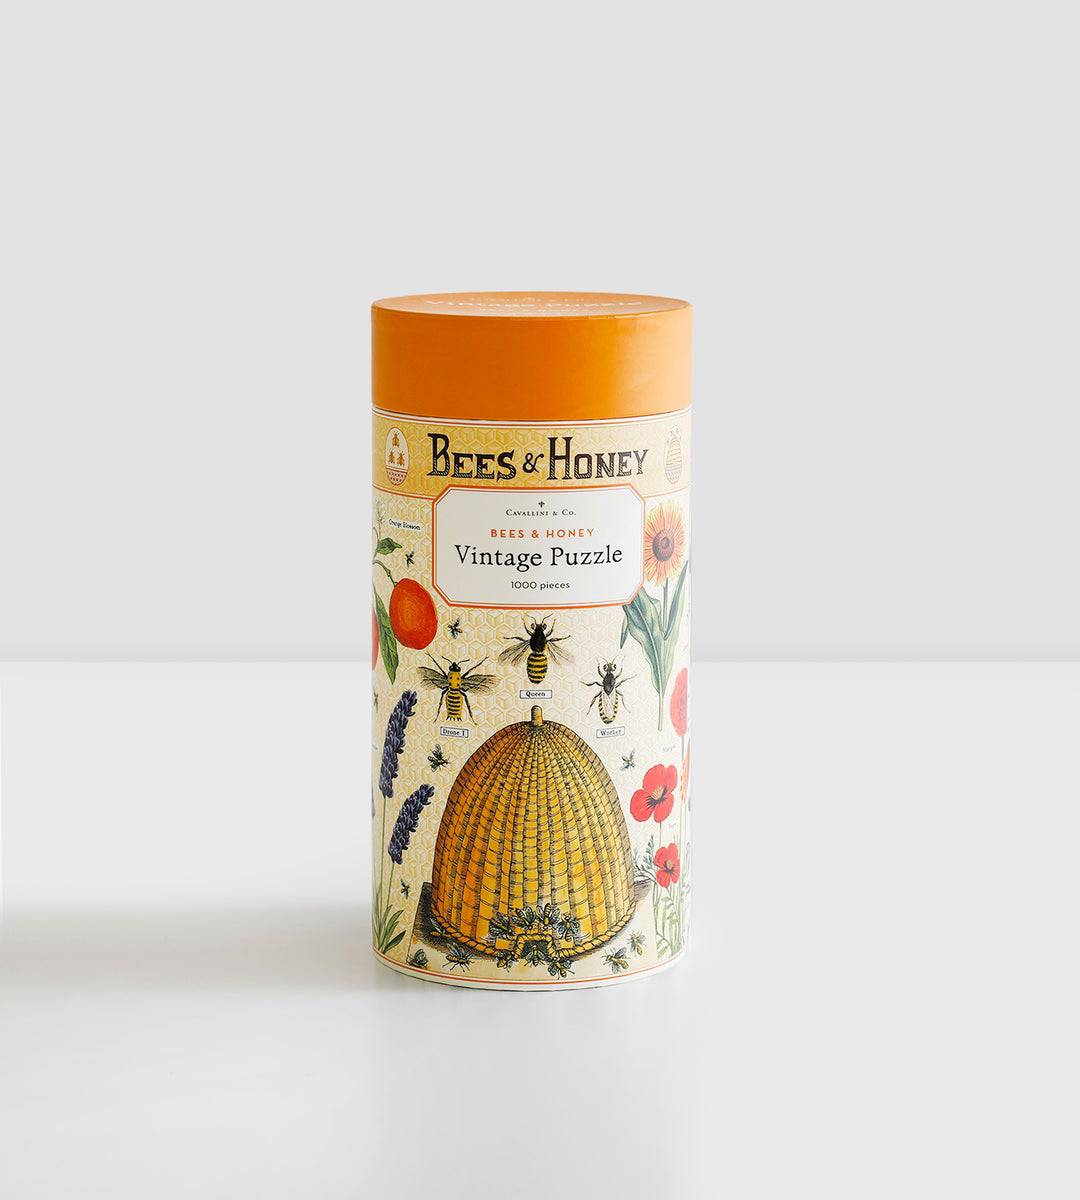 BEES & HONEY PUZZLE - Out of the Blue